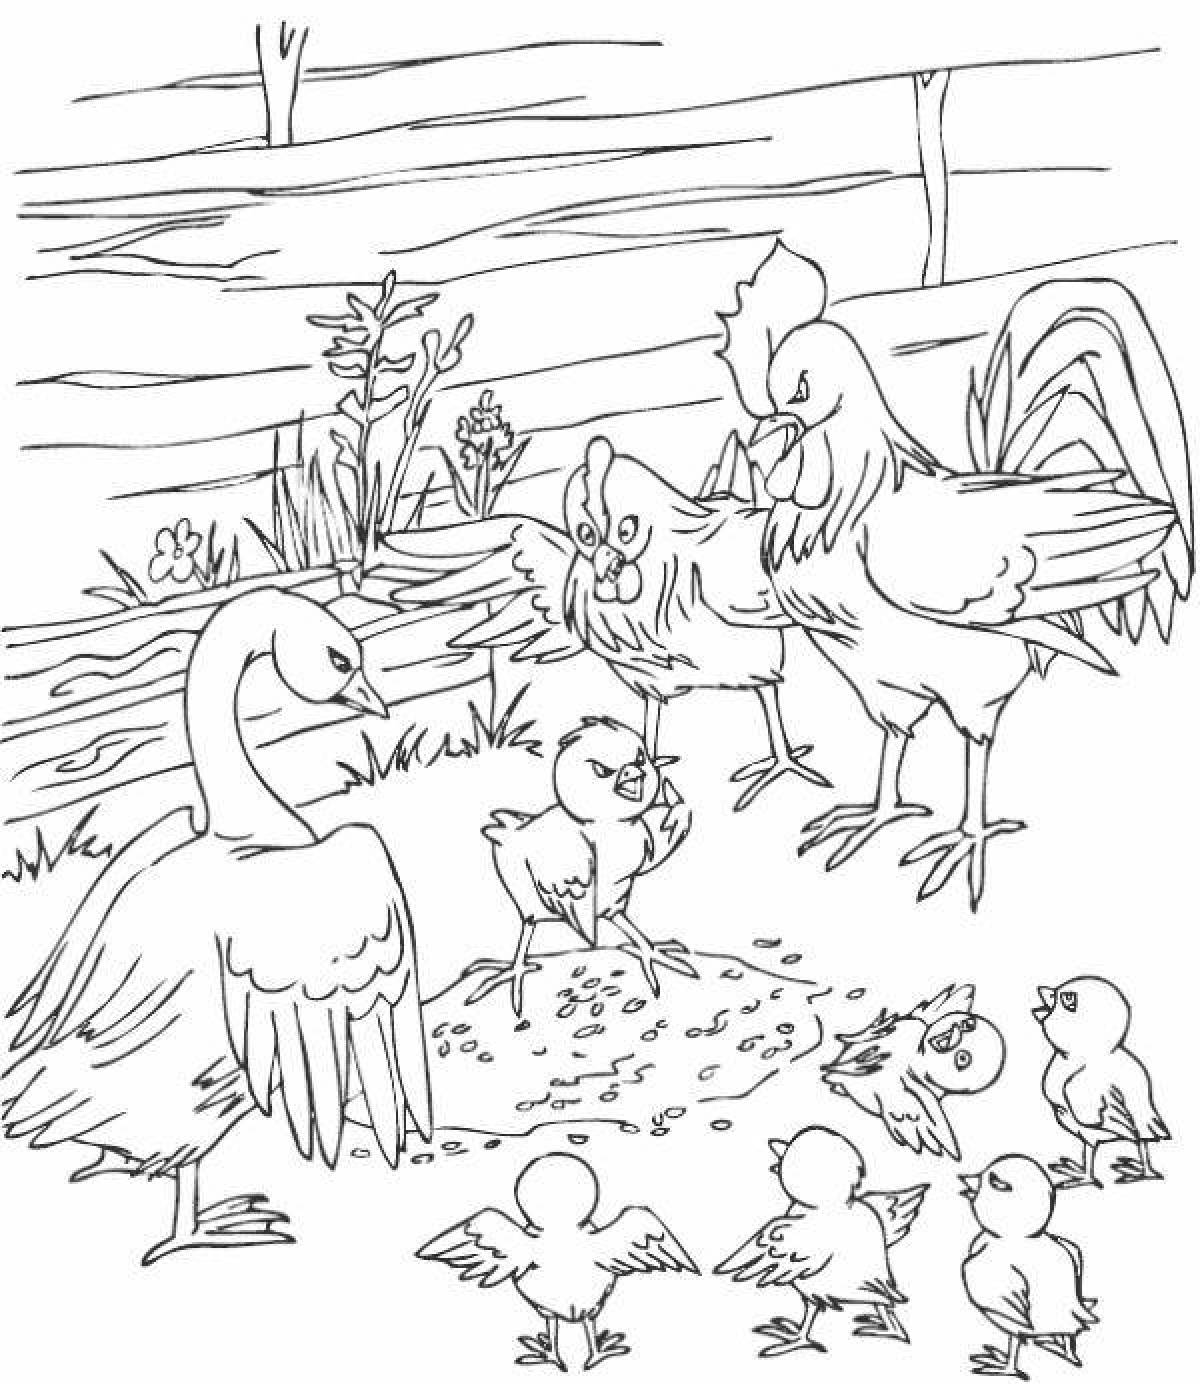 Calm bird's yard coloring page